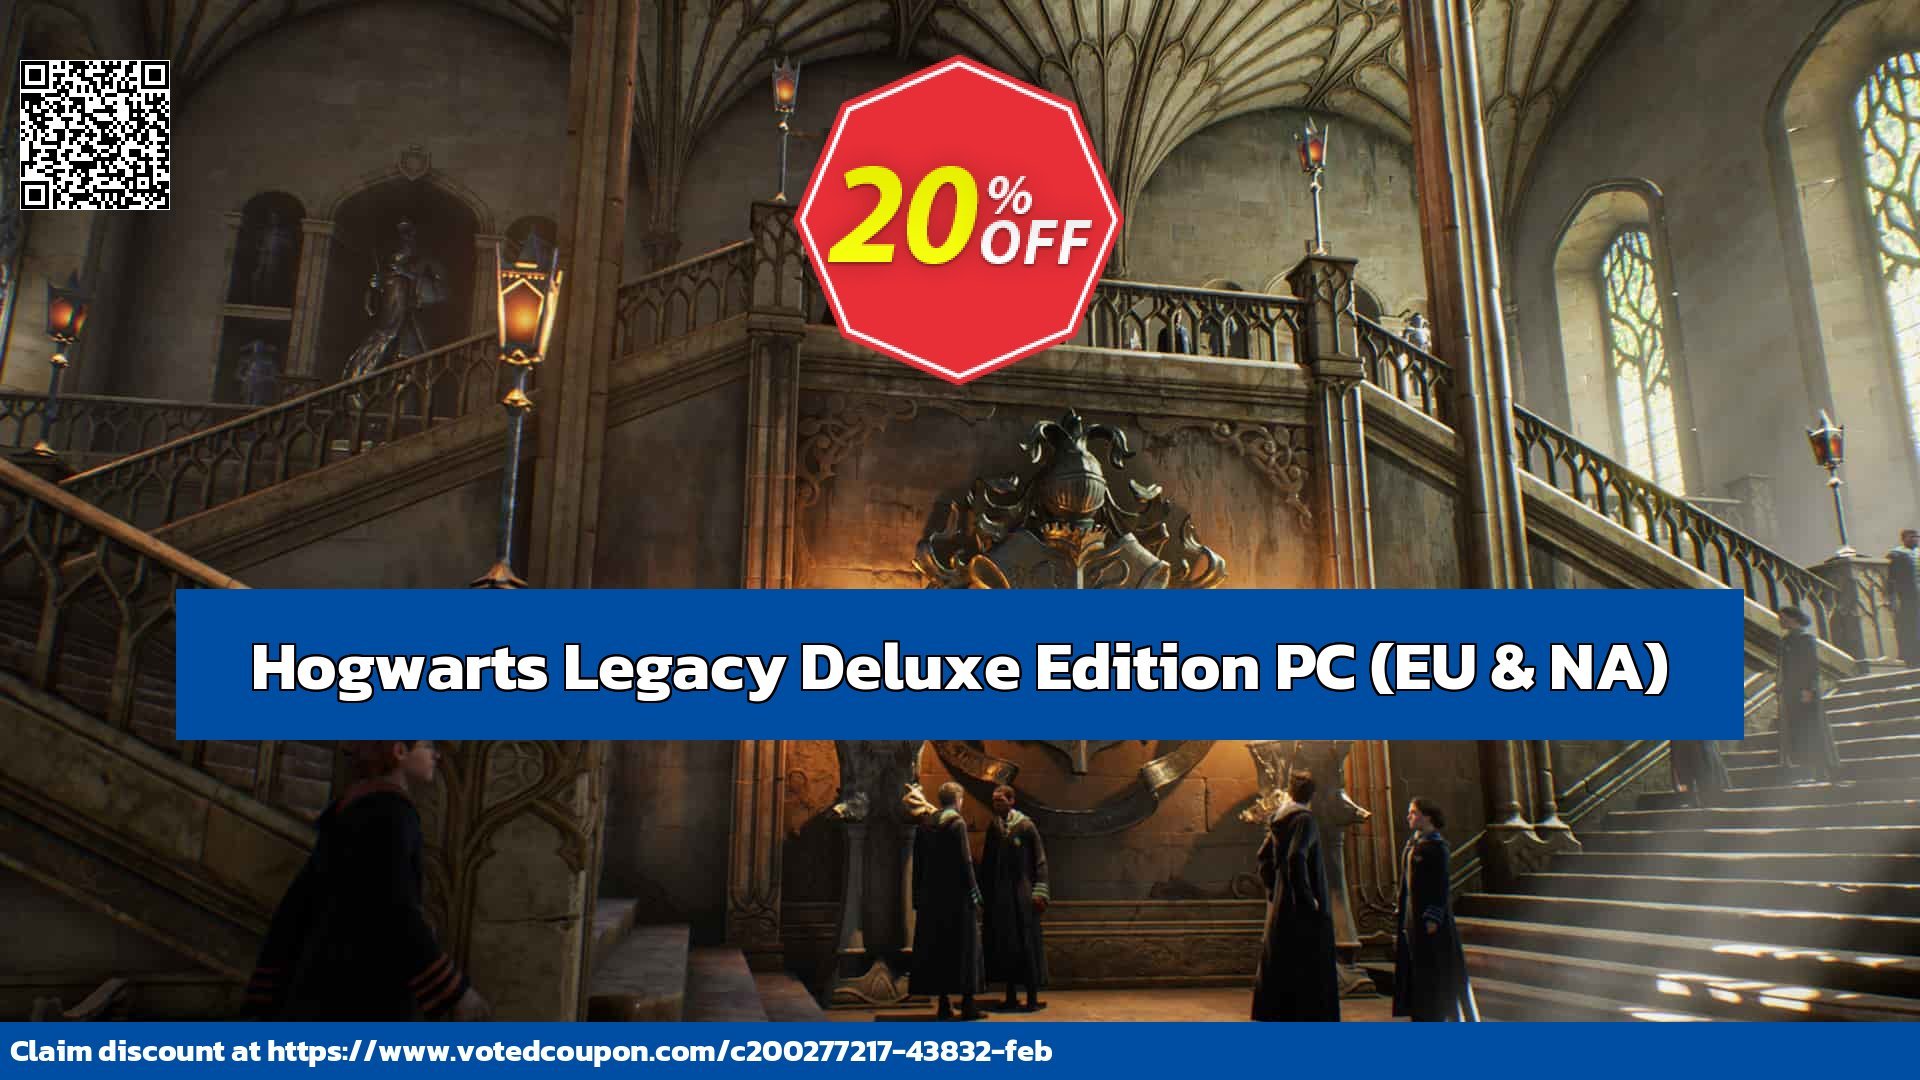 Hogwarts Legacy Deluxe Edition PC, EU & NA  Coupon Code May 2024, 20% OFF - VotedCoupon